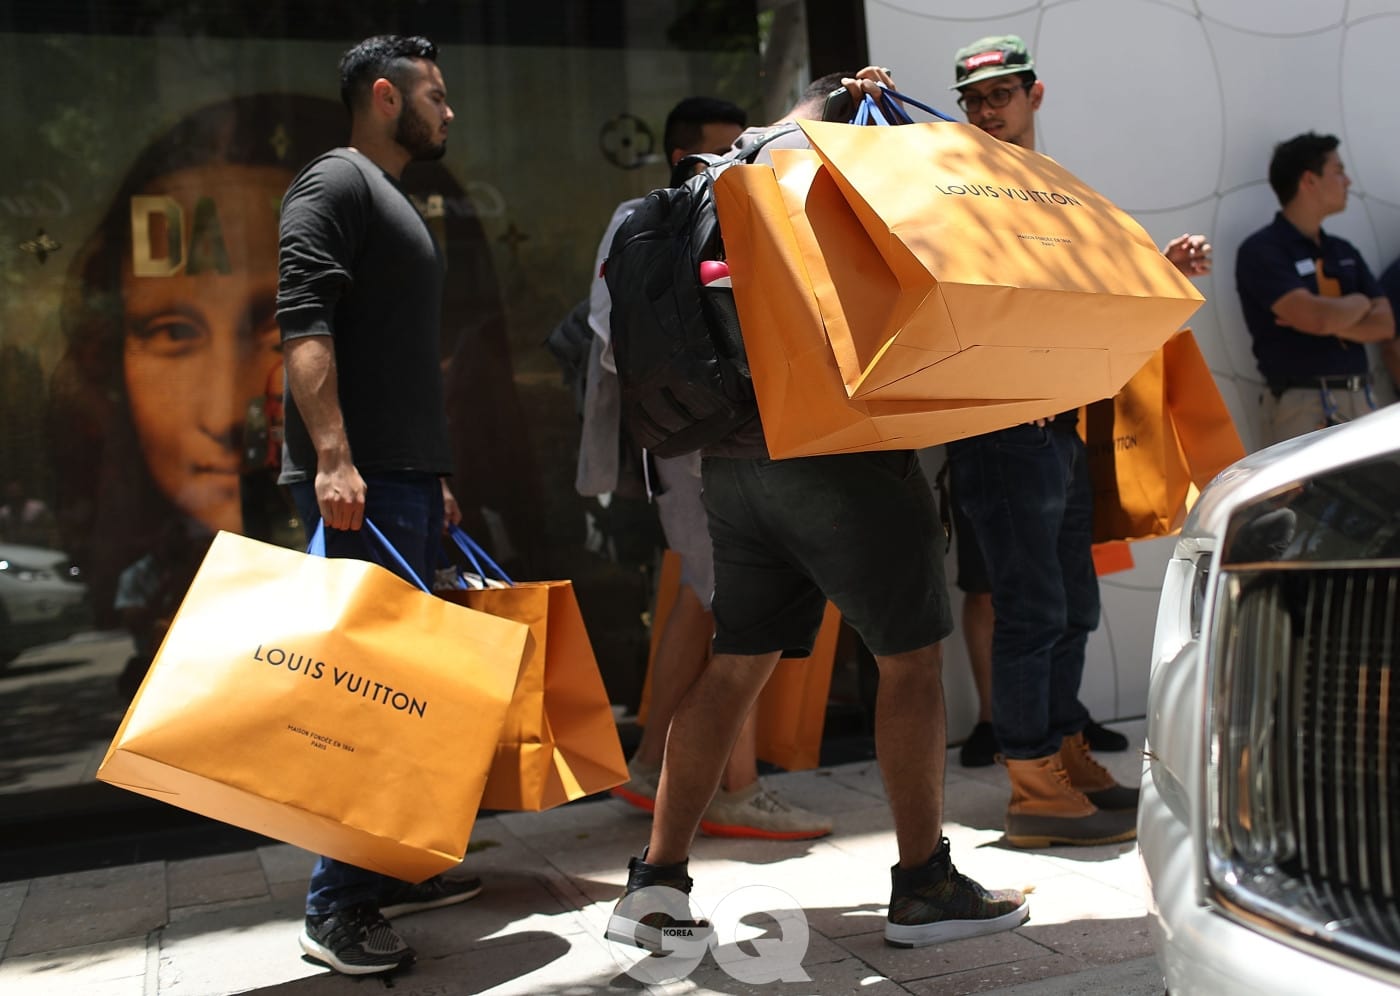 MIAMI, FL - JUNE 30:  Shoppers carry their Louis Vuitton bags from the store where they were selling limited edition supreme and Louis Vuitton collaboration items on June 30, 2017 in Miami, Florida.  The Louis Vuitton X Supreme collection pre-launched today in the American markets of Miami and Los Angeles with other pop-up locations worldwide that included Sydney, Tokyo, Seoul, Beijing, Paris and London.  (Photo by Joe Raedle/Getty Images)